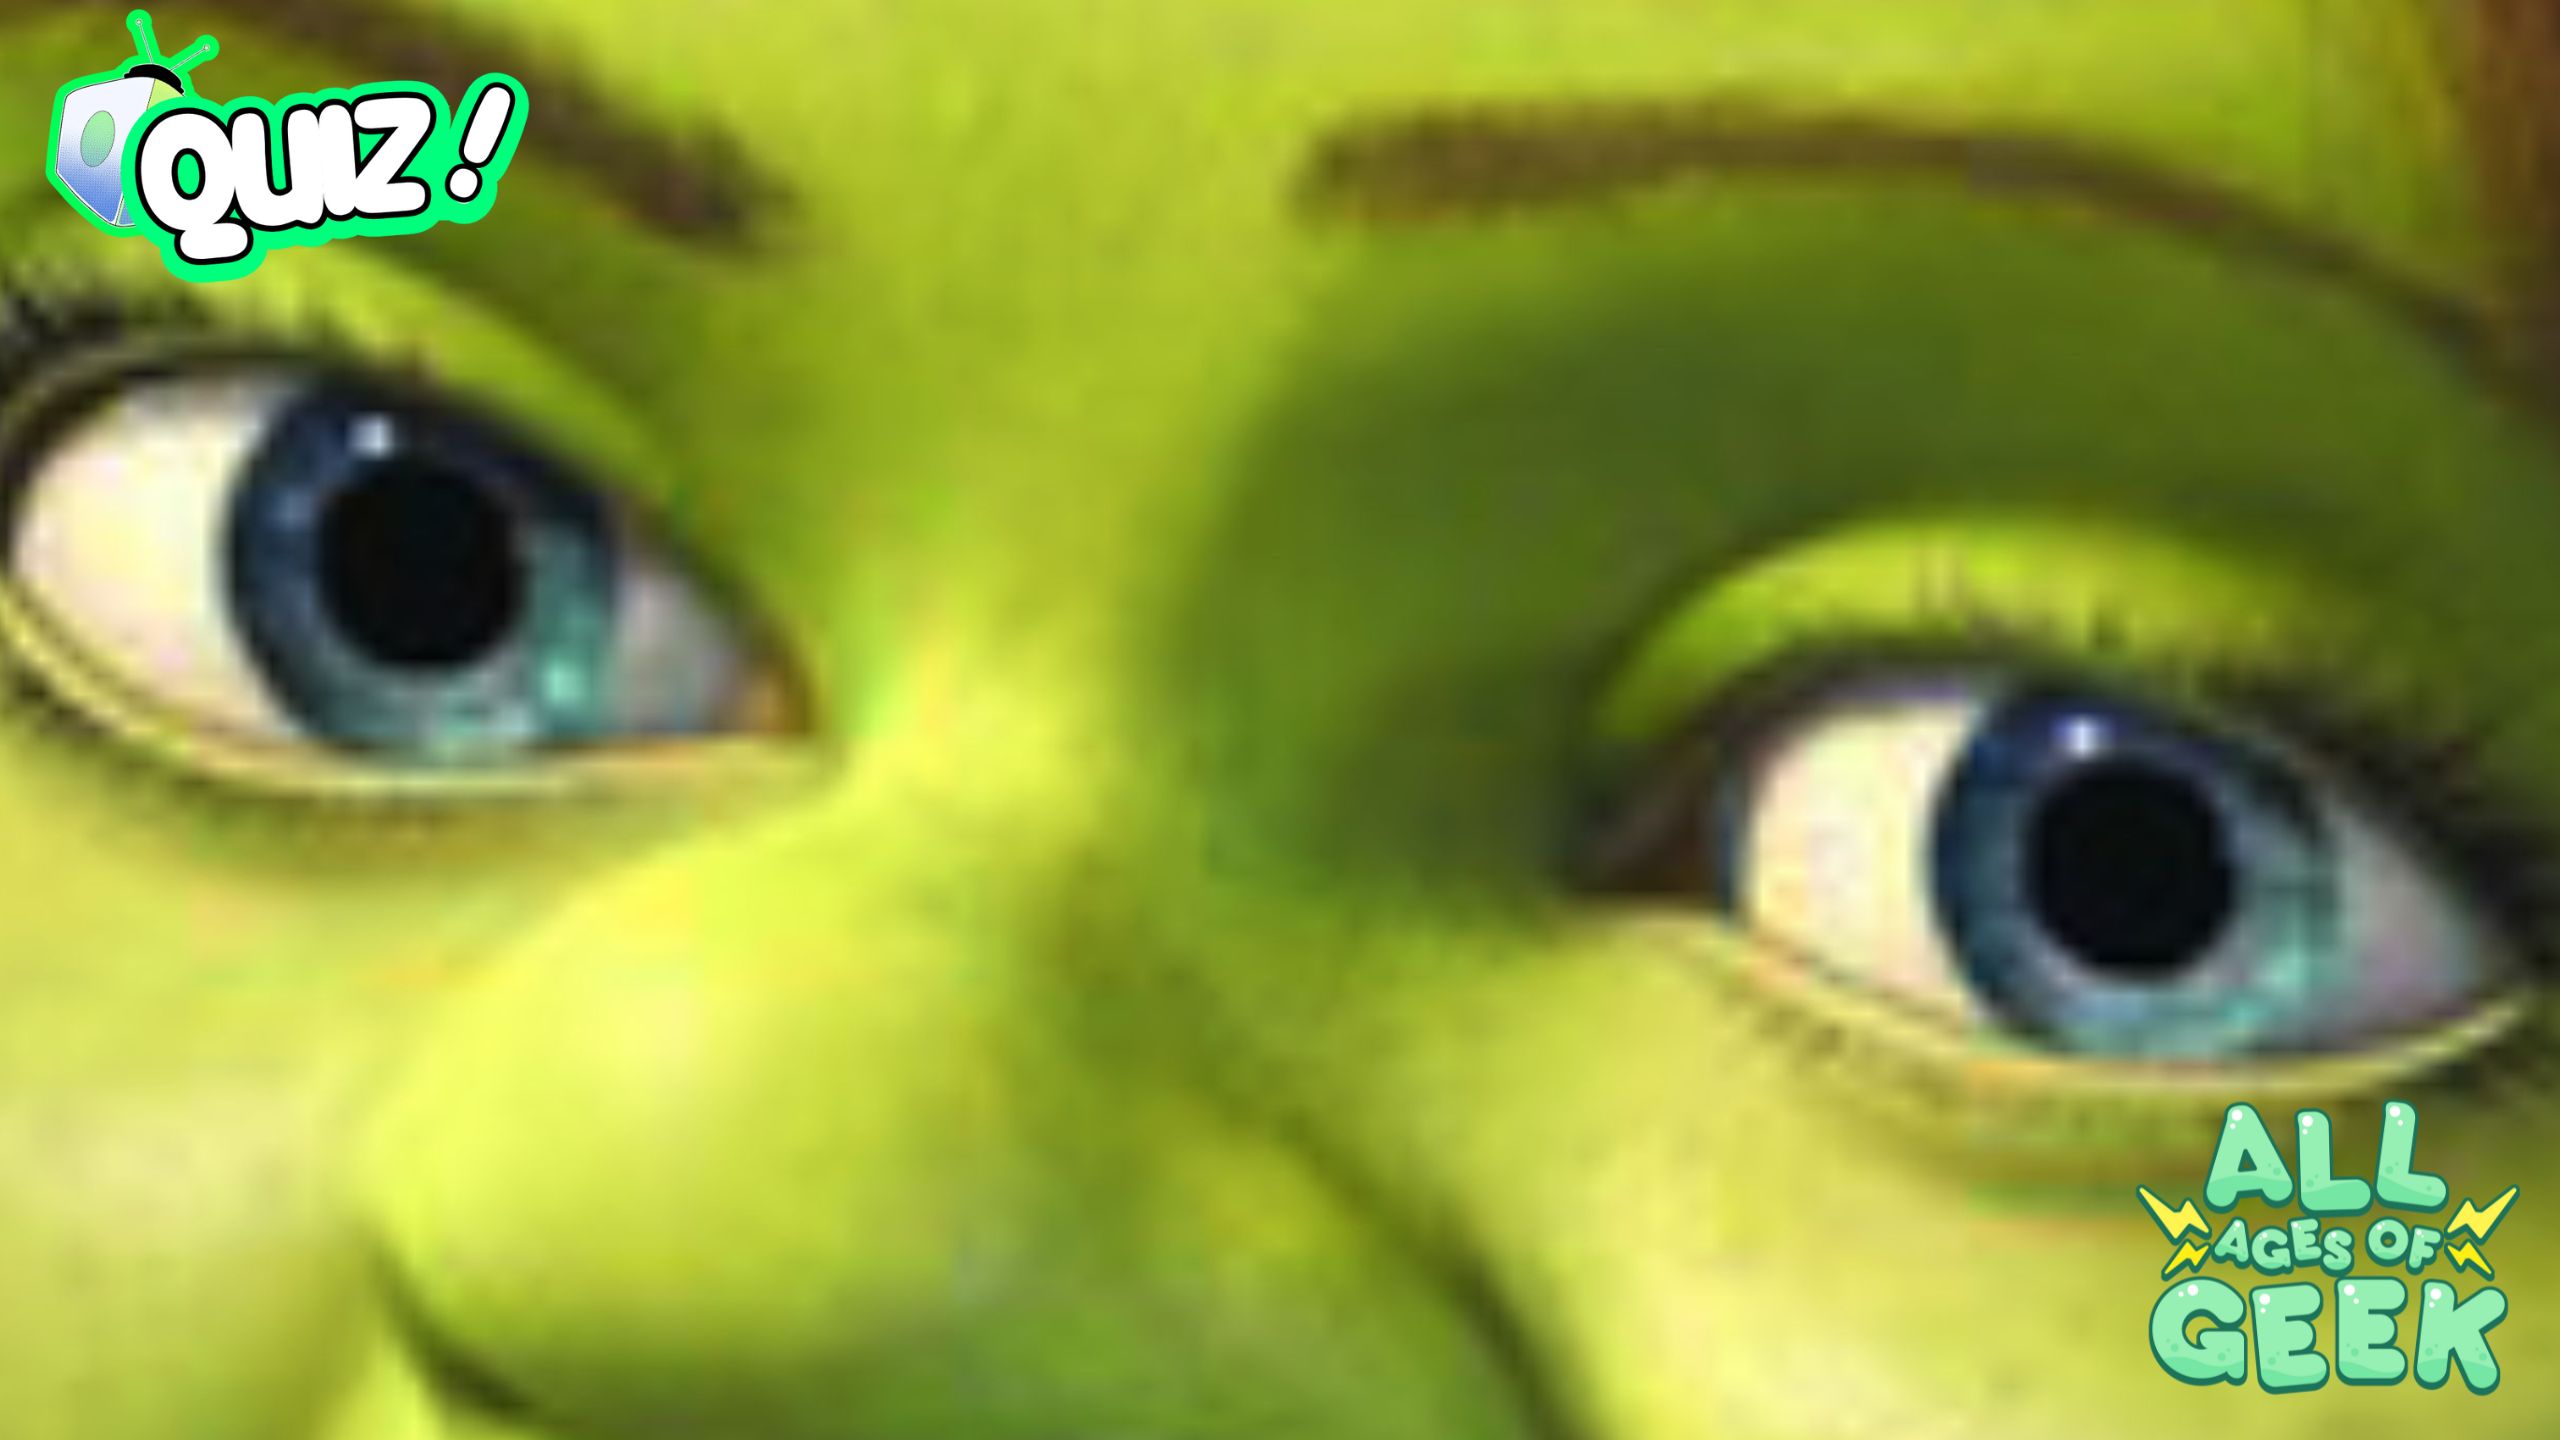 "A detailed close-up image of Fiona's eyes from the Shrek movie, showing her green skin and blue eyes. This image is featured on All Ages of Geek and includes their logo in the bottom right corner."